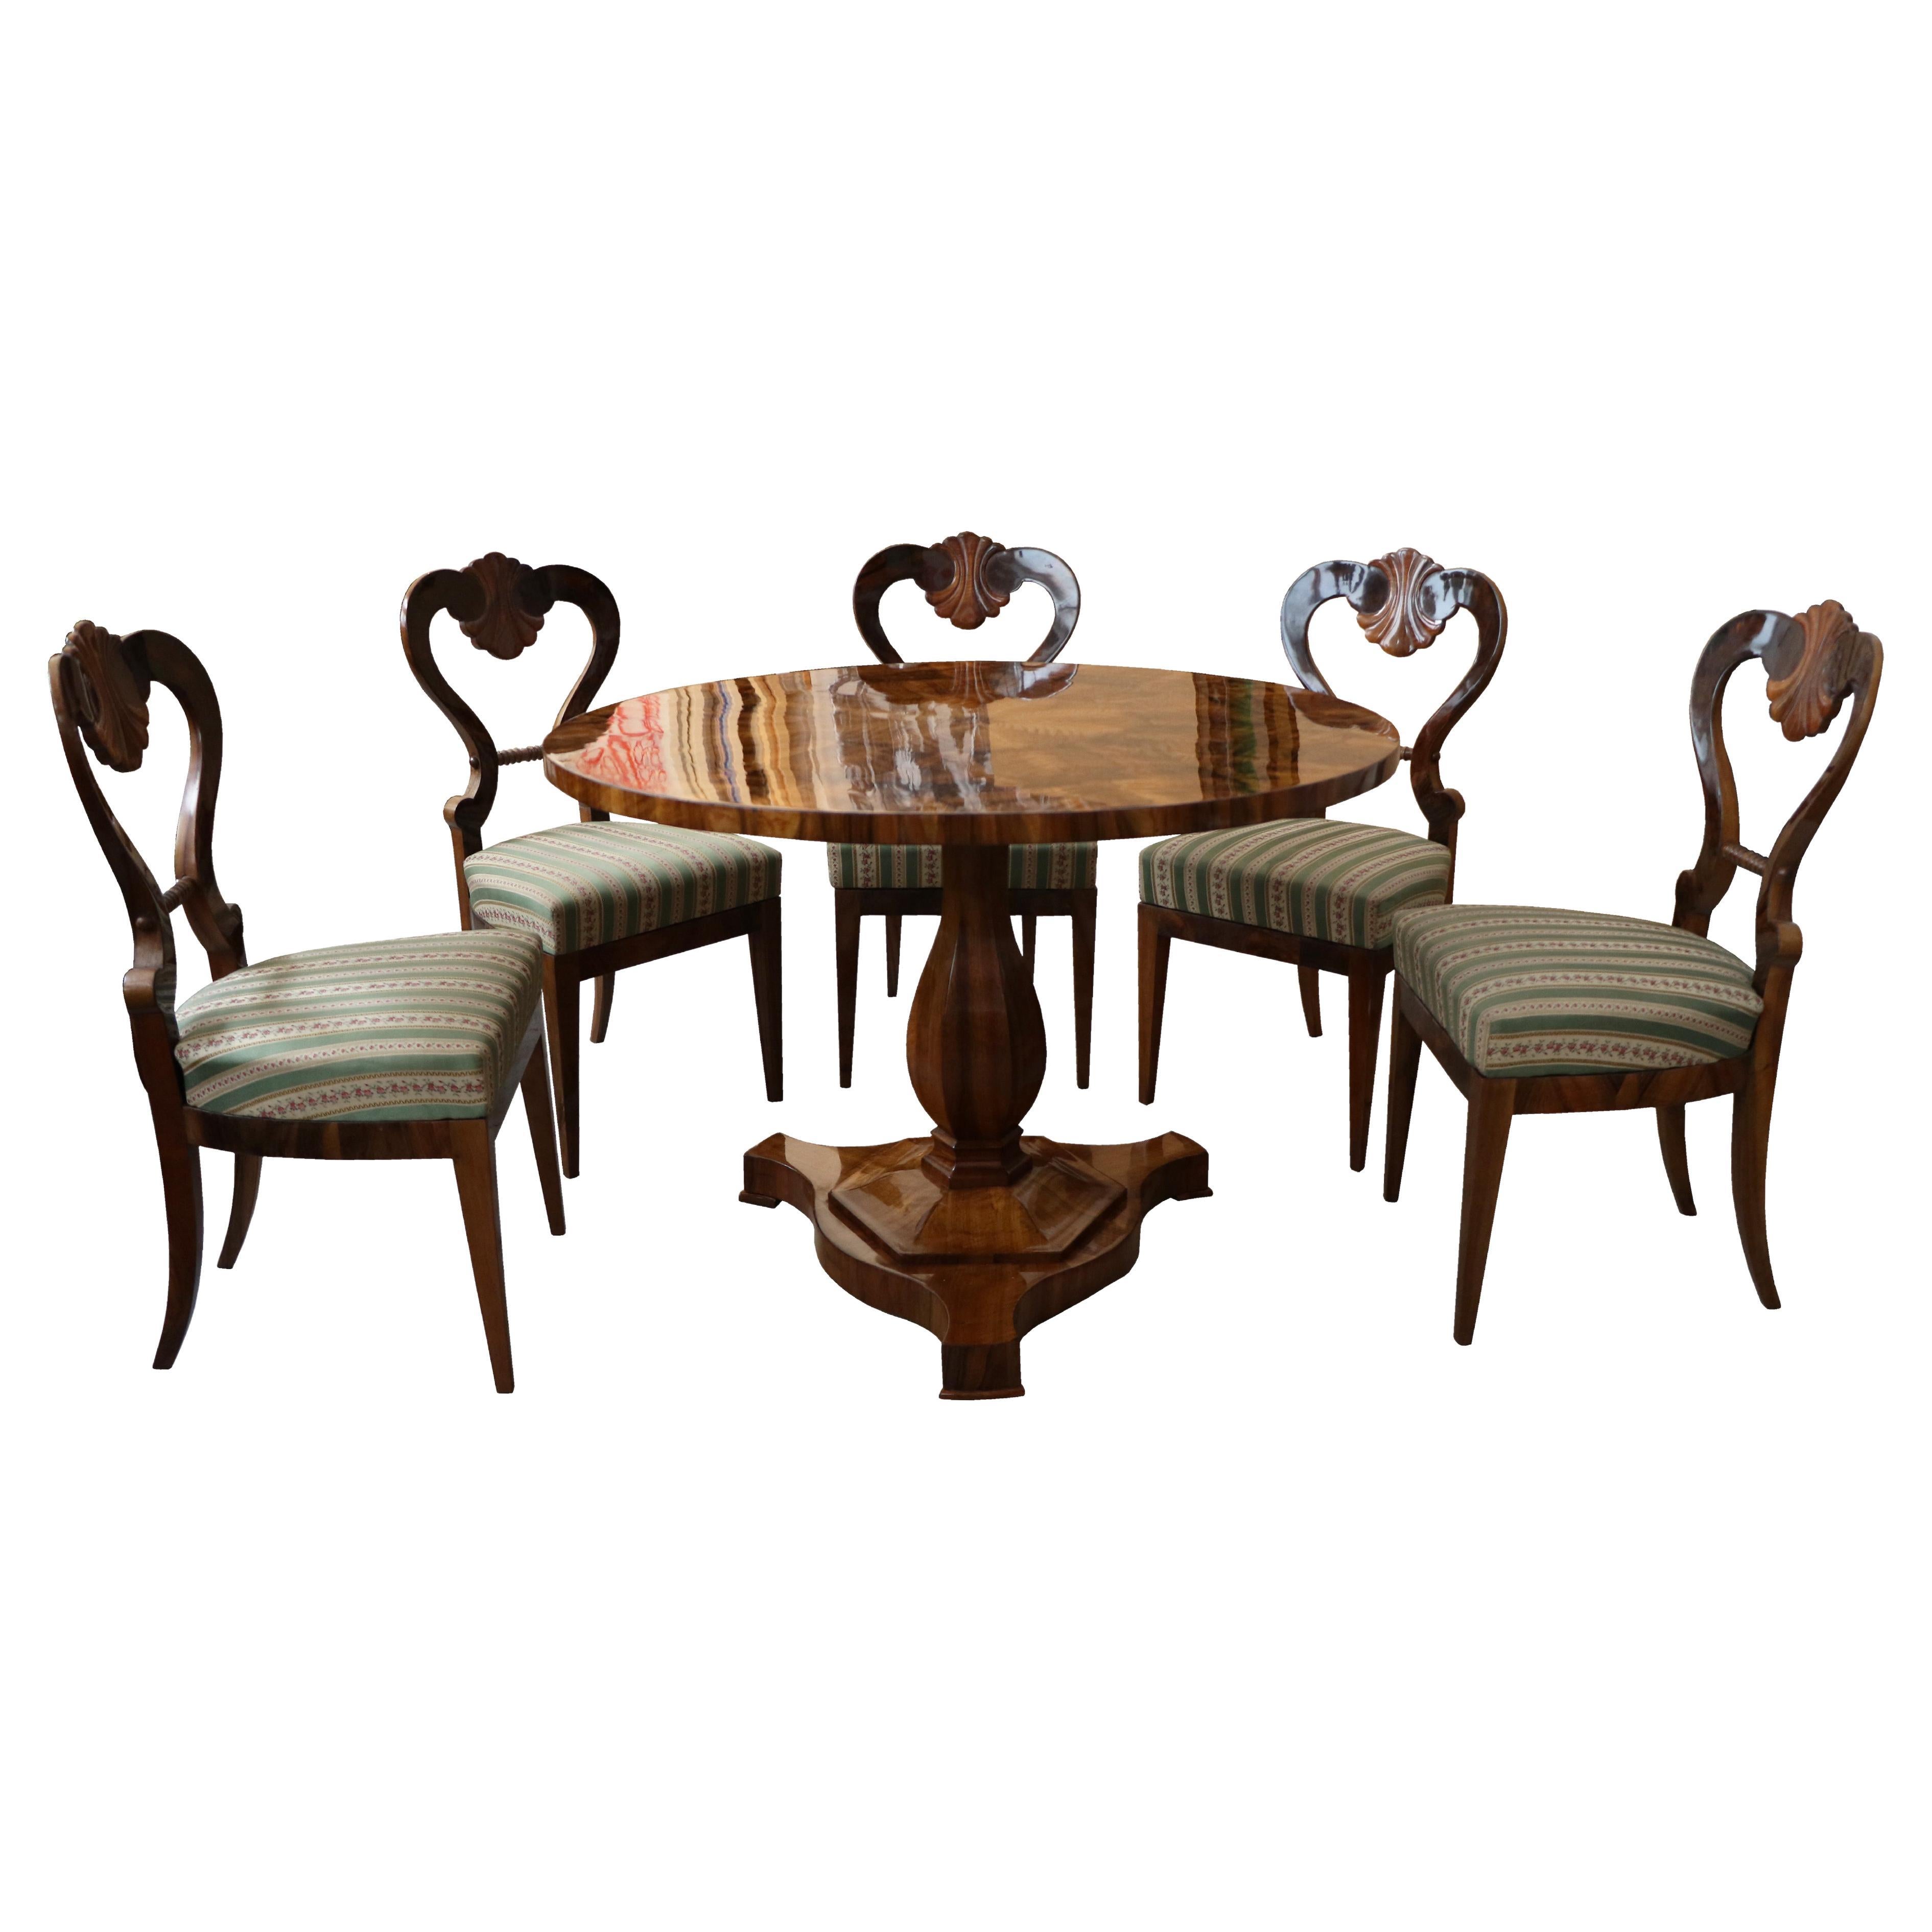 Hello,
These fine set of five Viennese Biedermeier walnut chairs from c, 1825 is the best example of an early Viennese Biedermeier which reflect innovative design and highest quality craftsmanship.

Viennese Biedermeier because of their